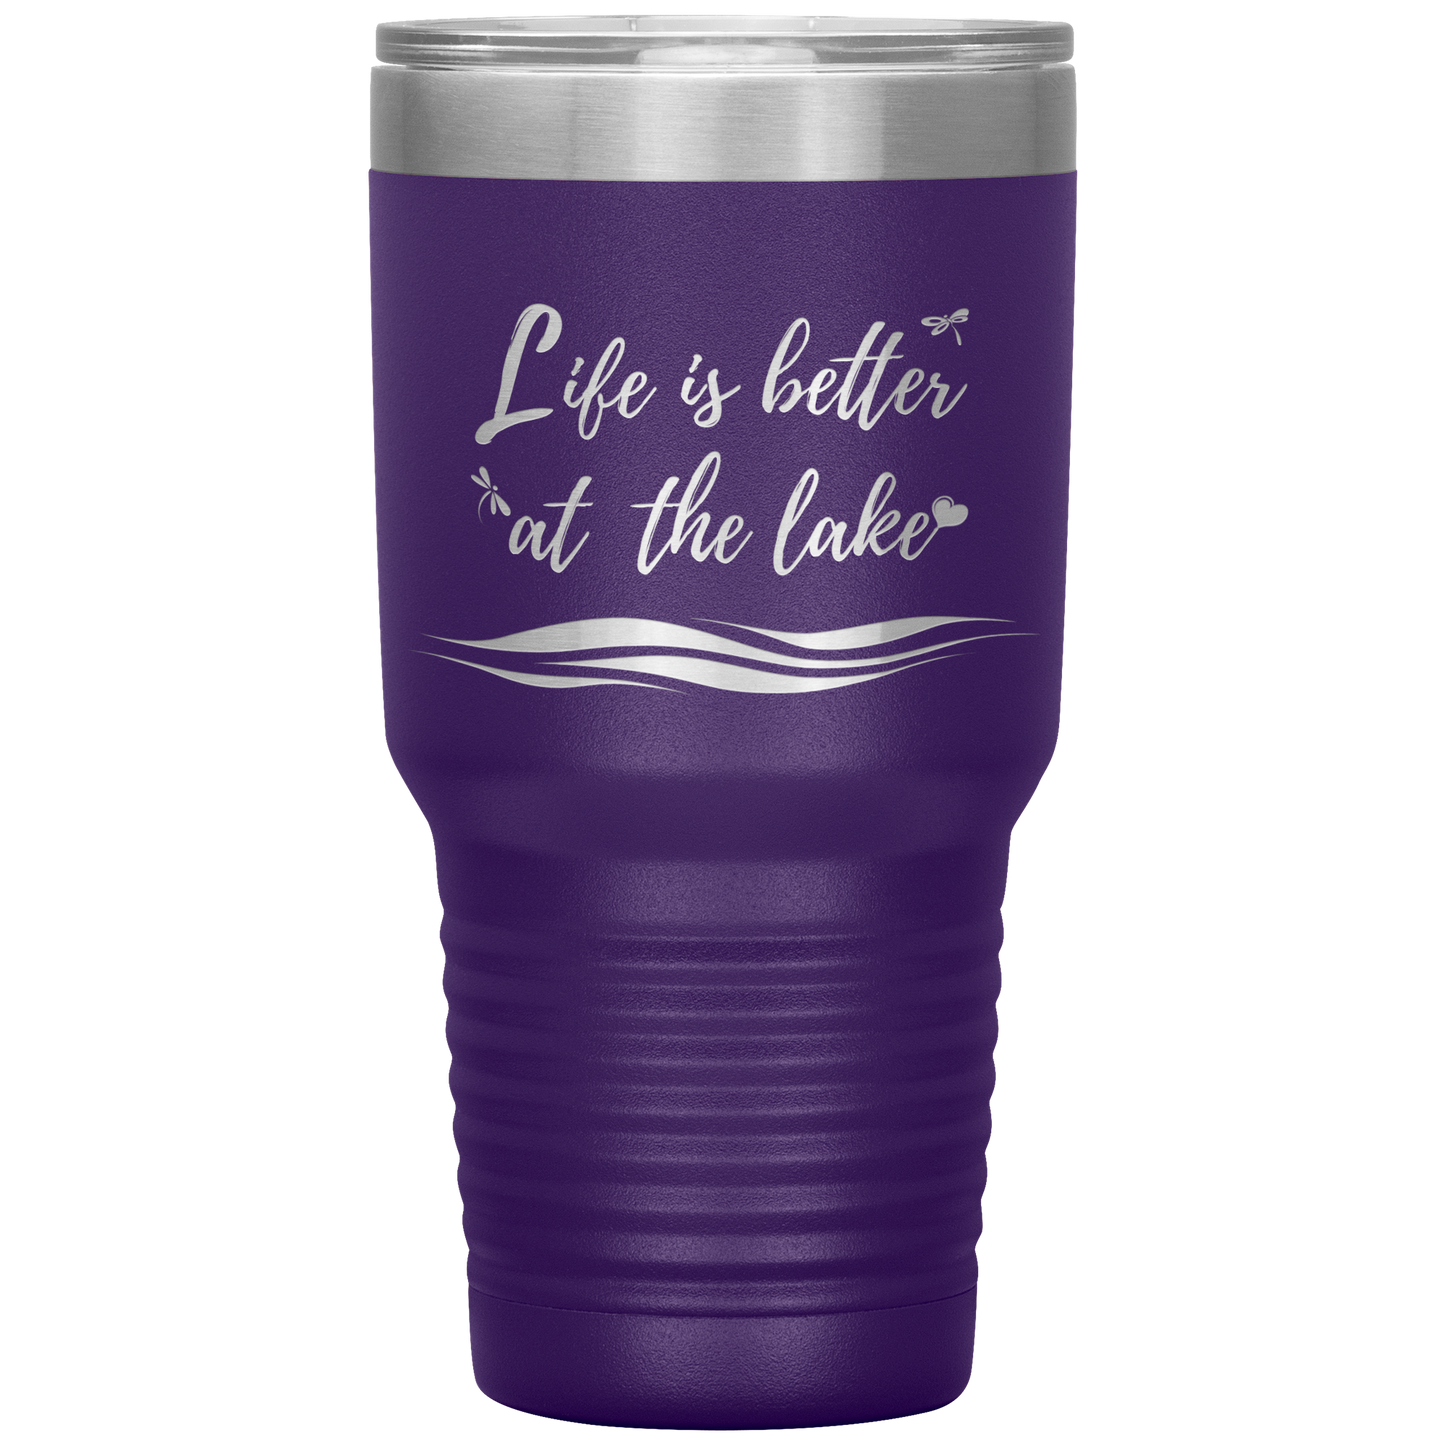 Life is better at the lake - Large Tumbler